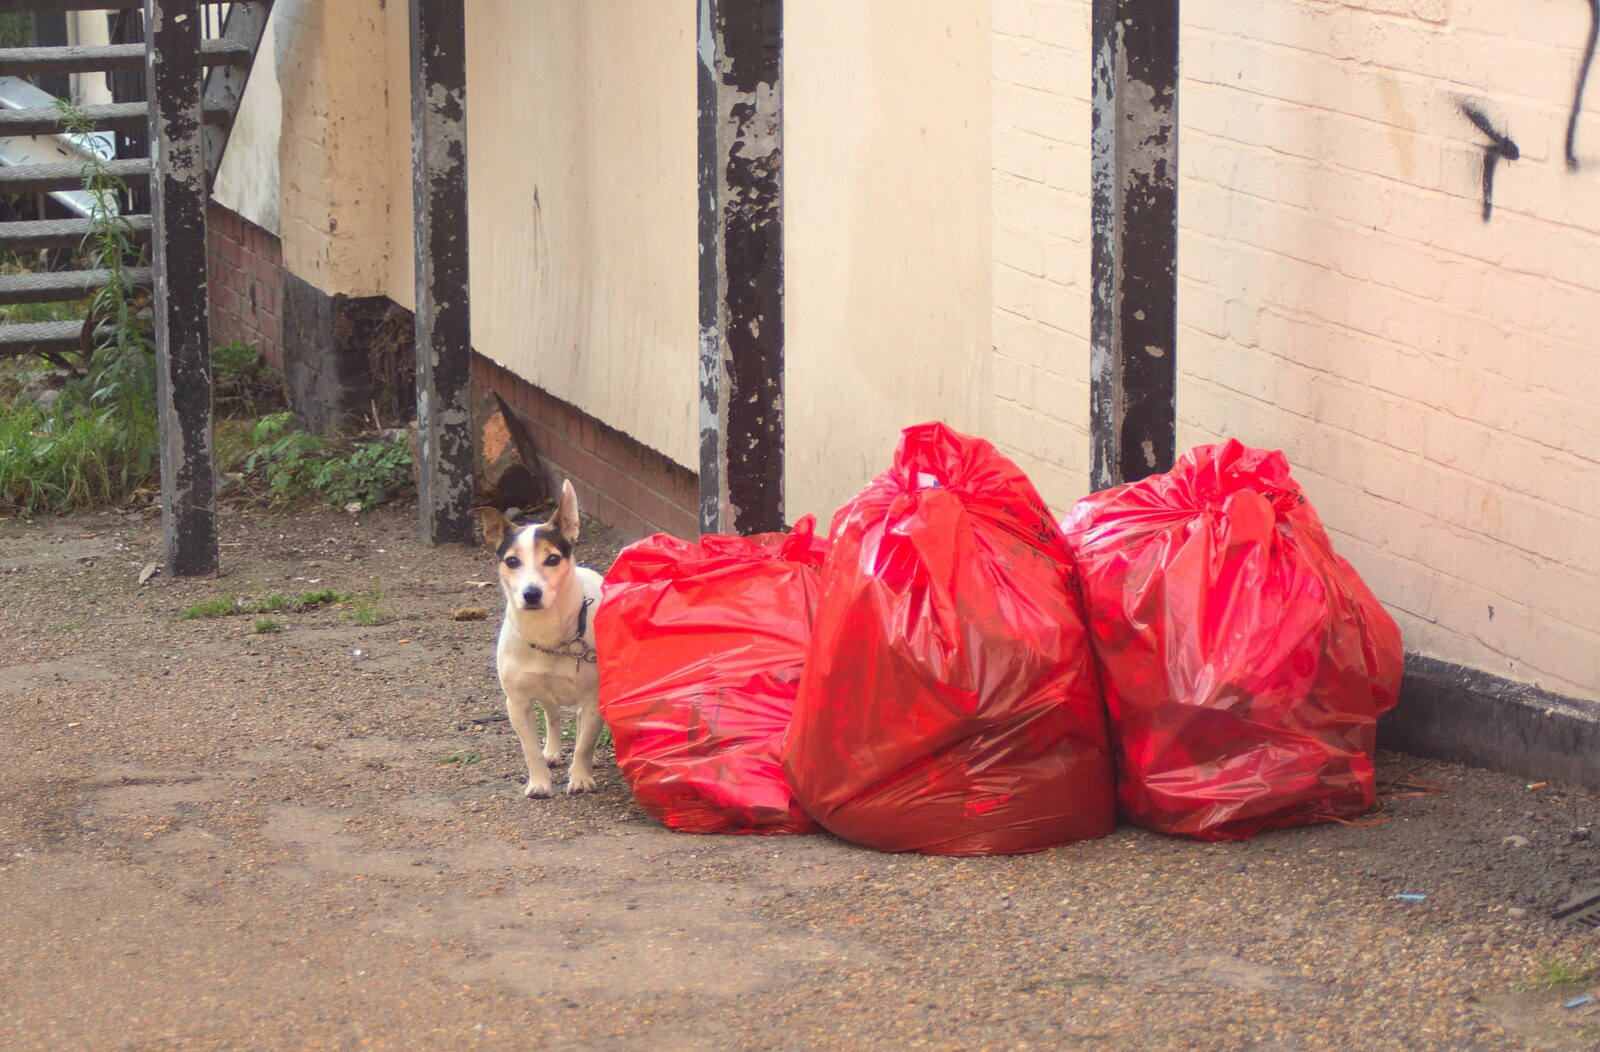 A small dog waits by some sacks of rubbish from The NCT Sale and a Walk in the Woods, Bressingham and Thornham, Norfolk and Suffolk - 27th November 2011